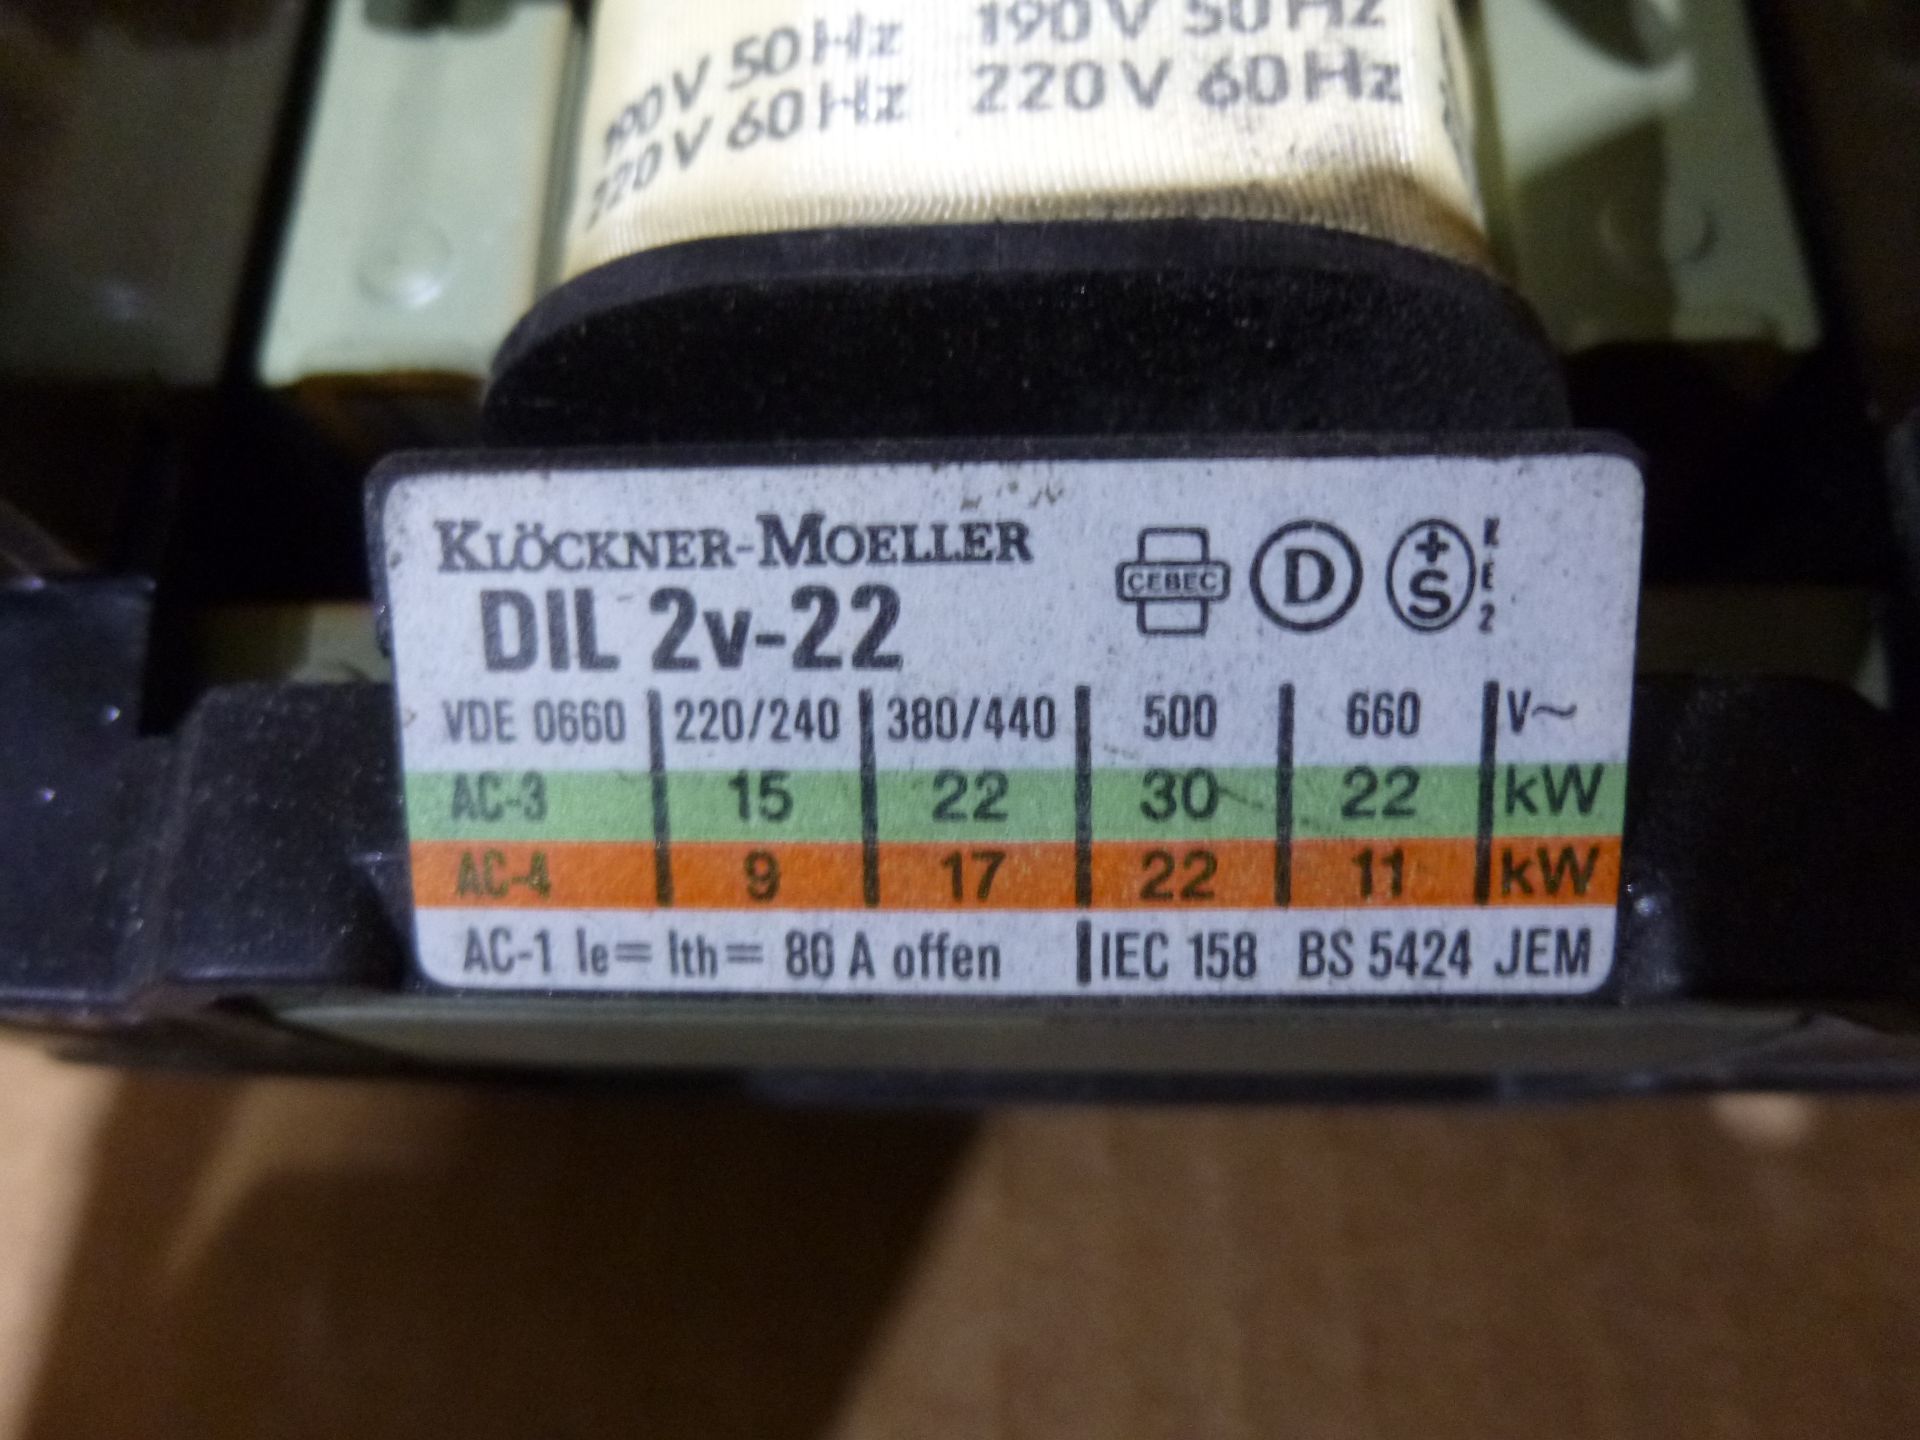 Klockner-Moeller model DIL-2V-22, as always with Brolyn LLC auctions, all lots can be picked up from - Image 2 of 2